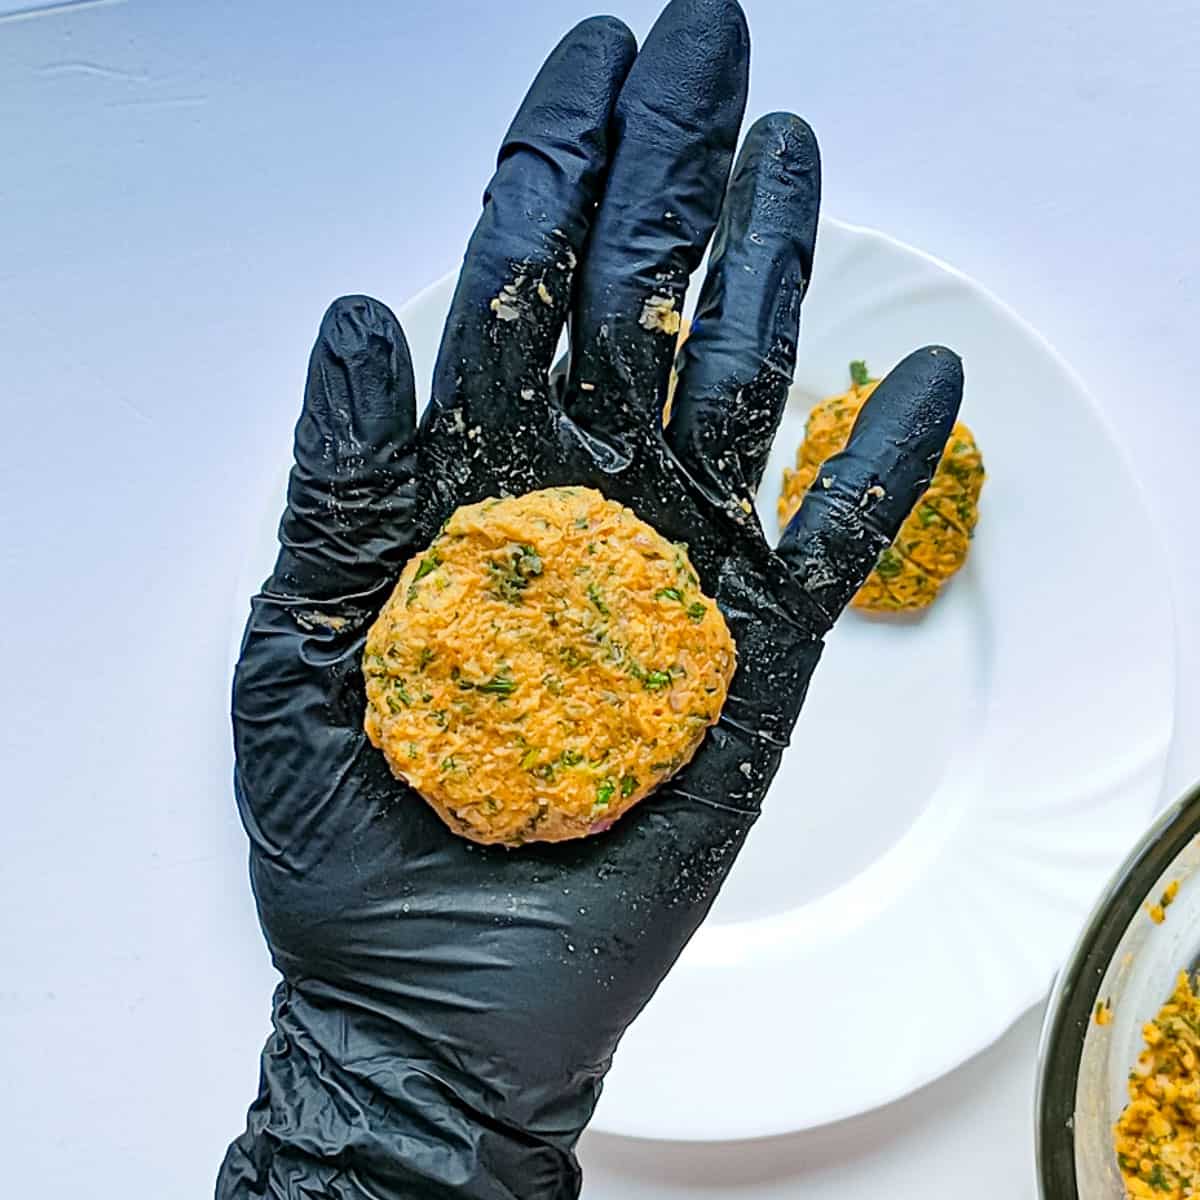 Chana cutlet being shaped into a round on the palm, ready to be fried.